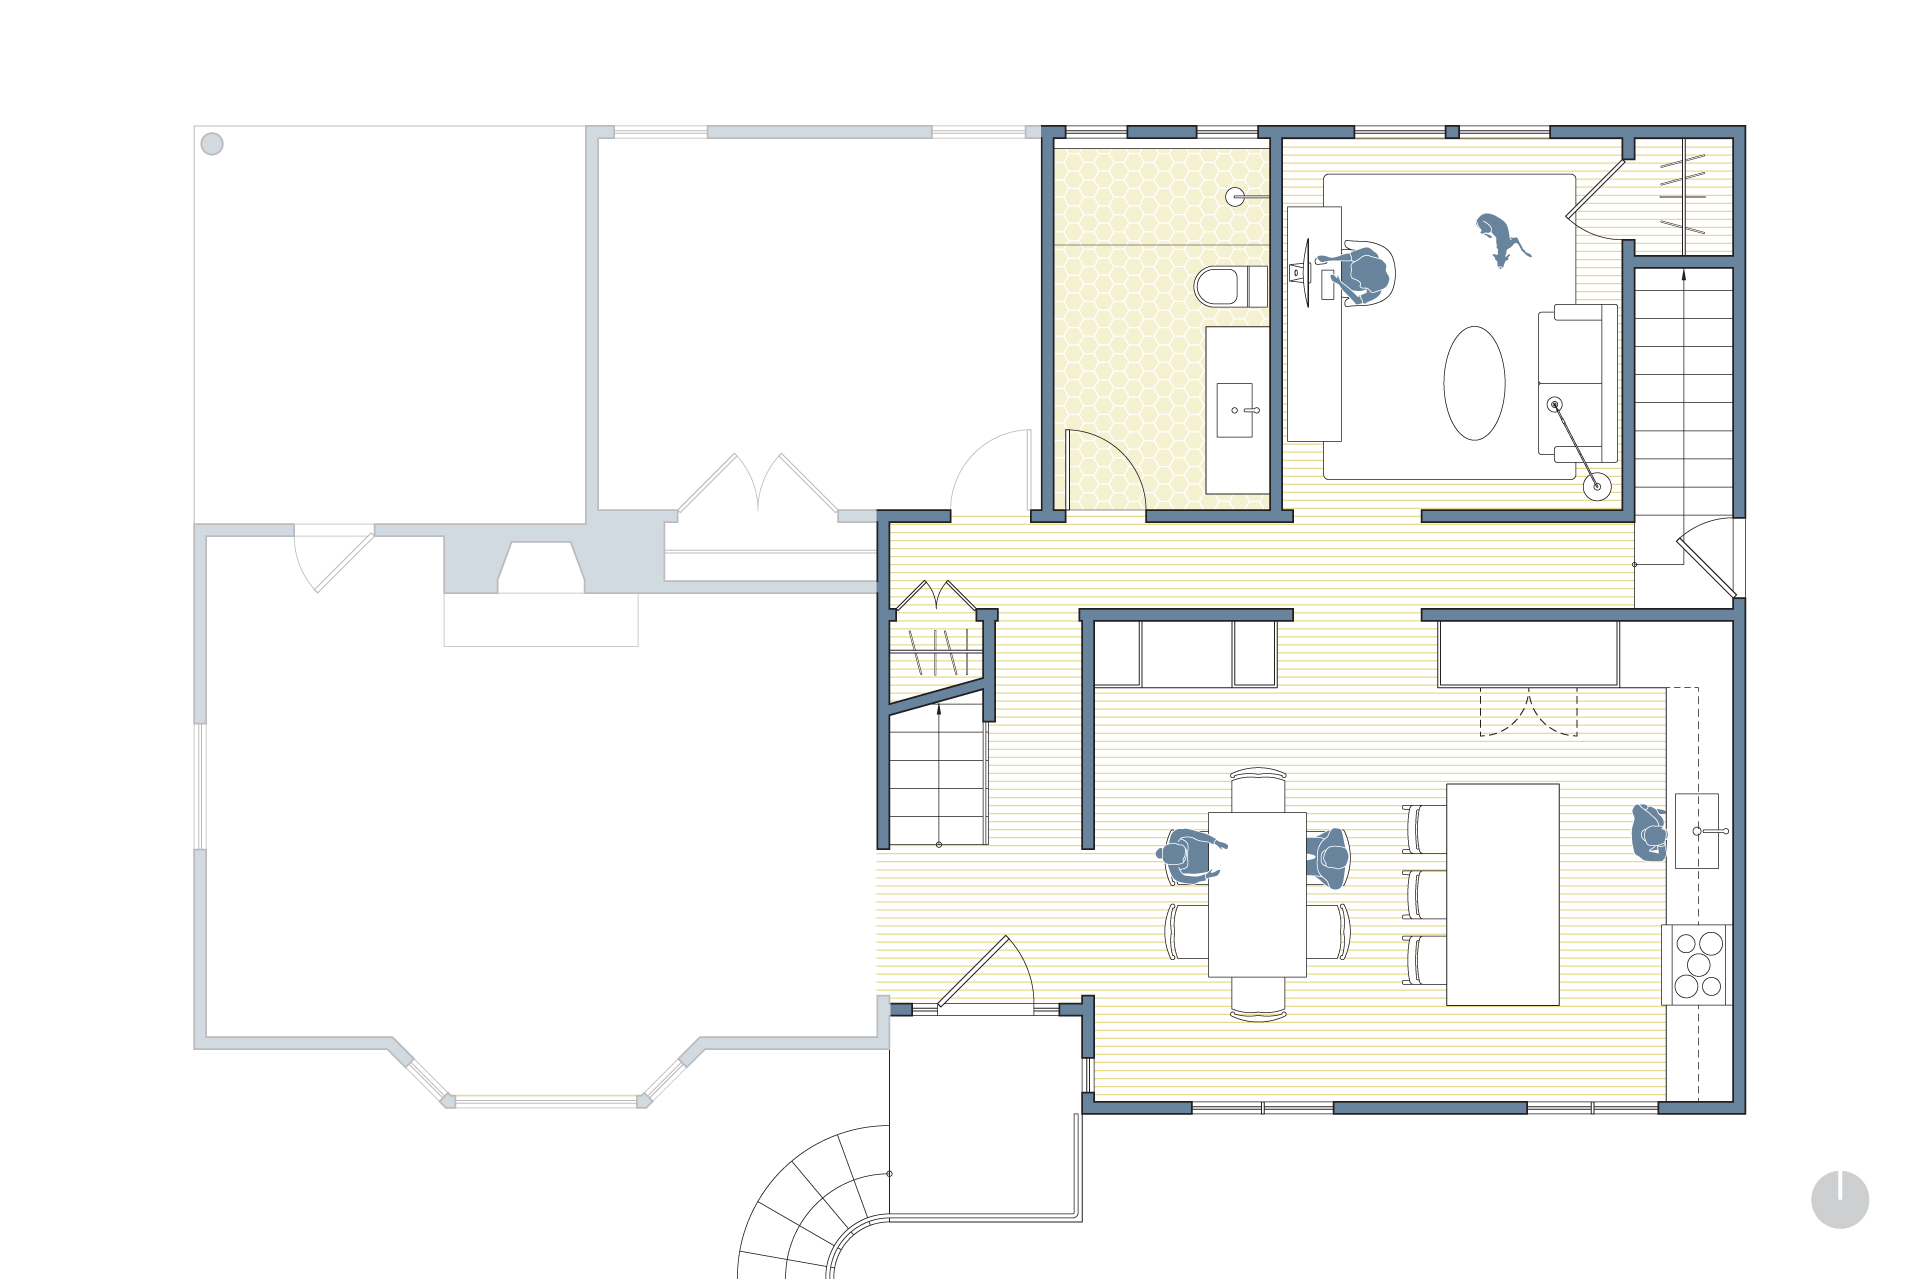 This is a drawing showing the floor plan of the renovated house at the Alameda Modern.